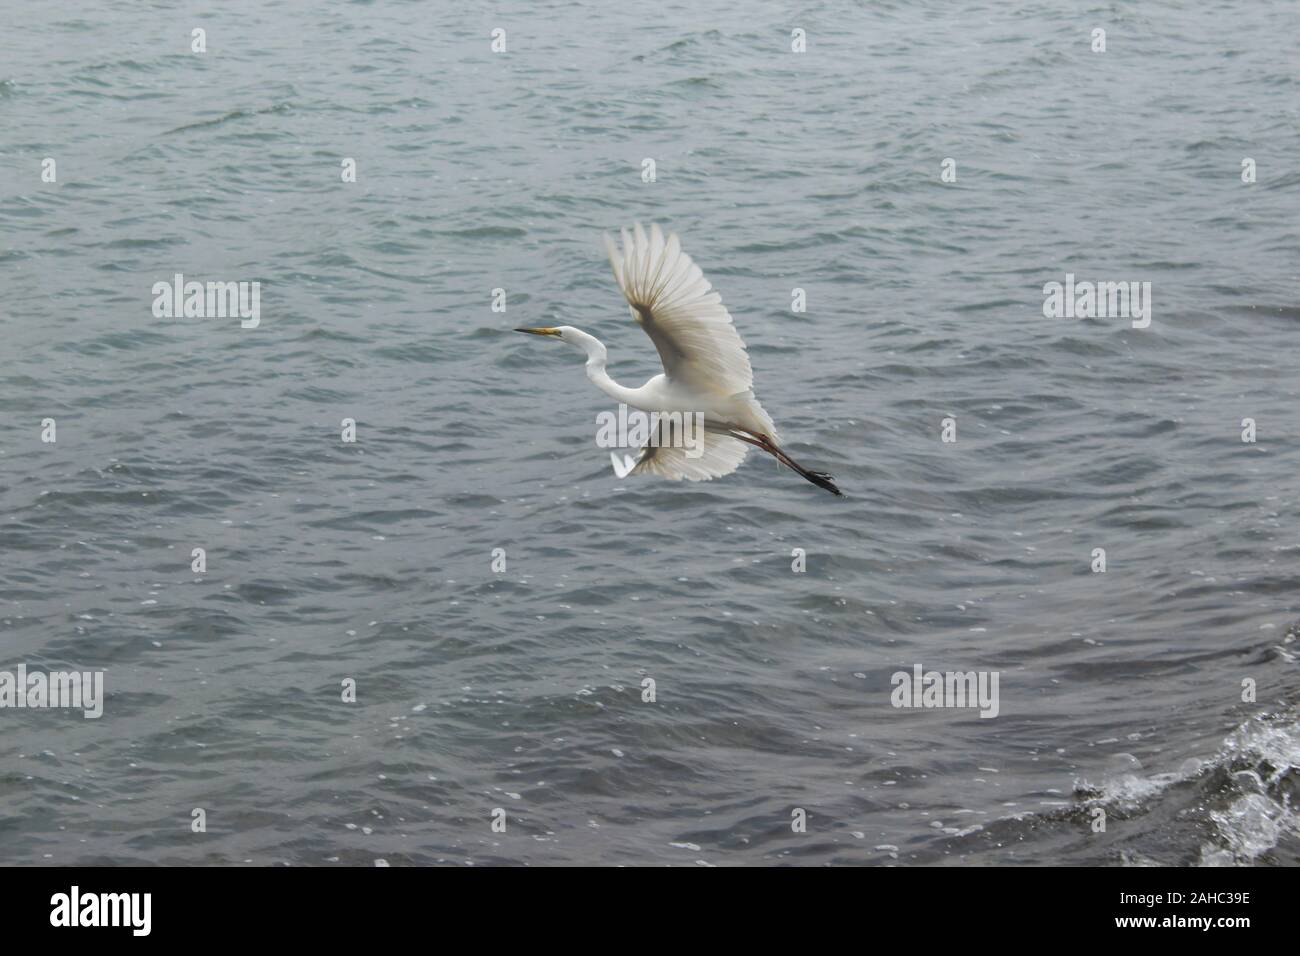 A Great Egret ( often mistaken for a Heron ) takes flight over choppy waters in country Australia.  Scientific name is Ardea Alba. Stock Photo